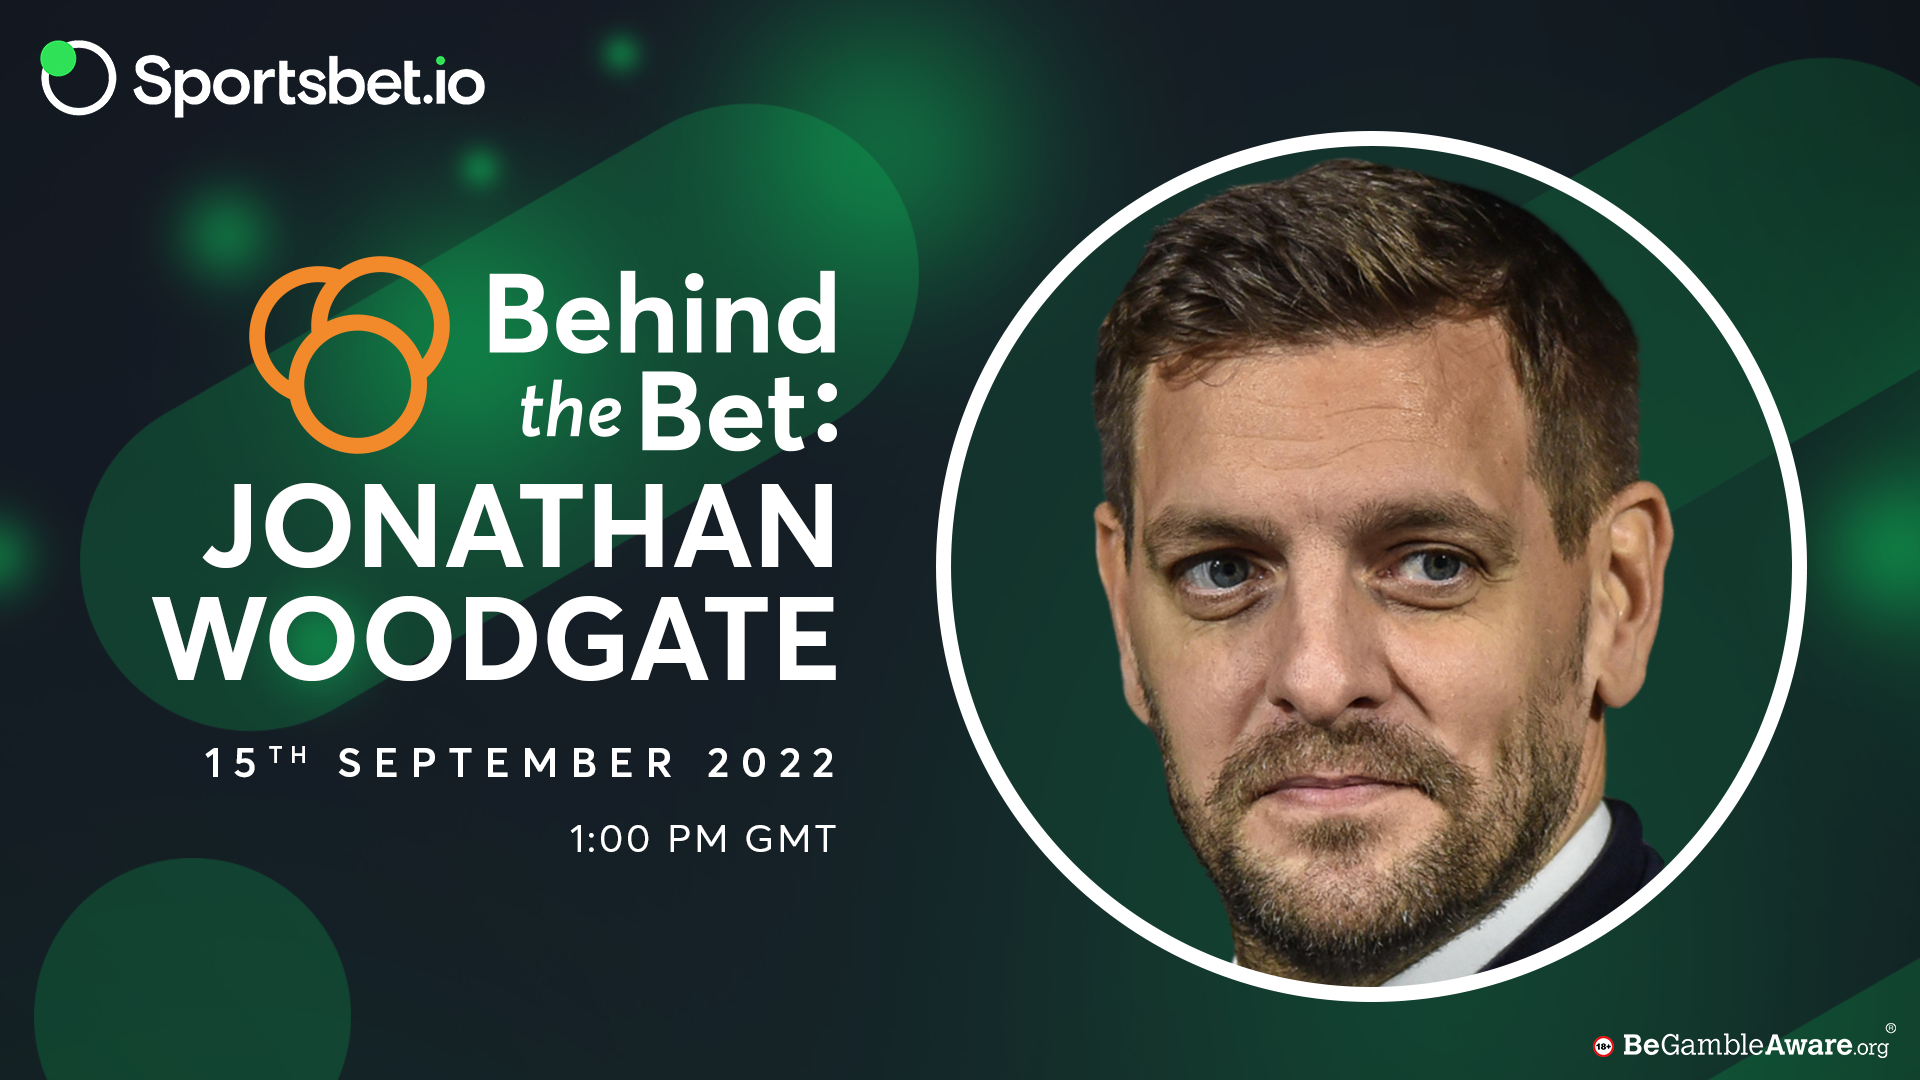 Jonathan Woodgate - Behind the Bet